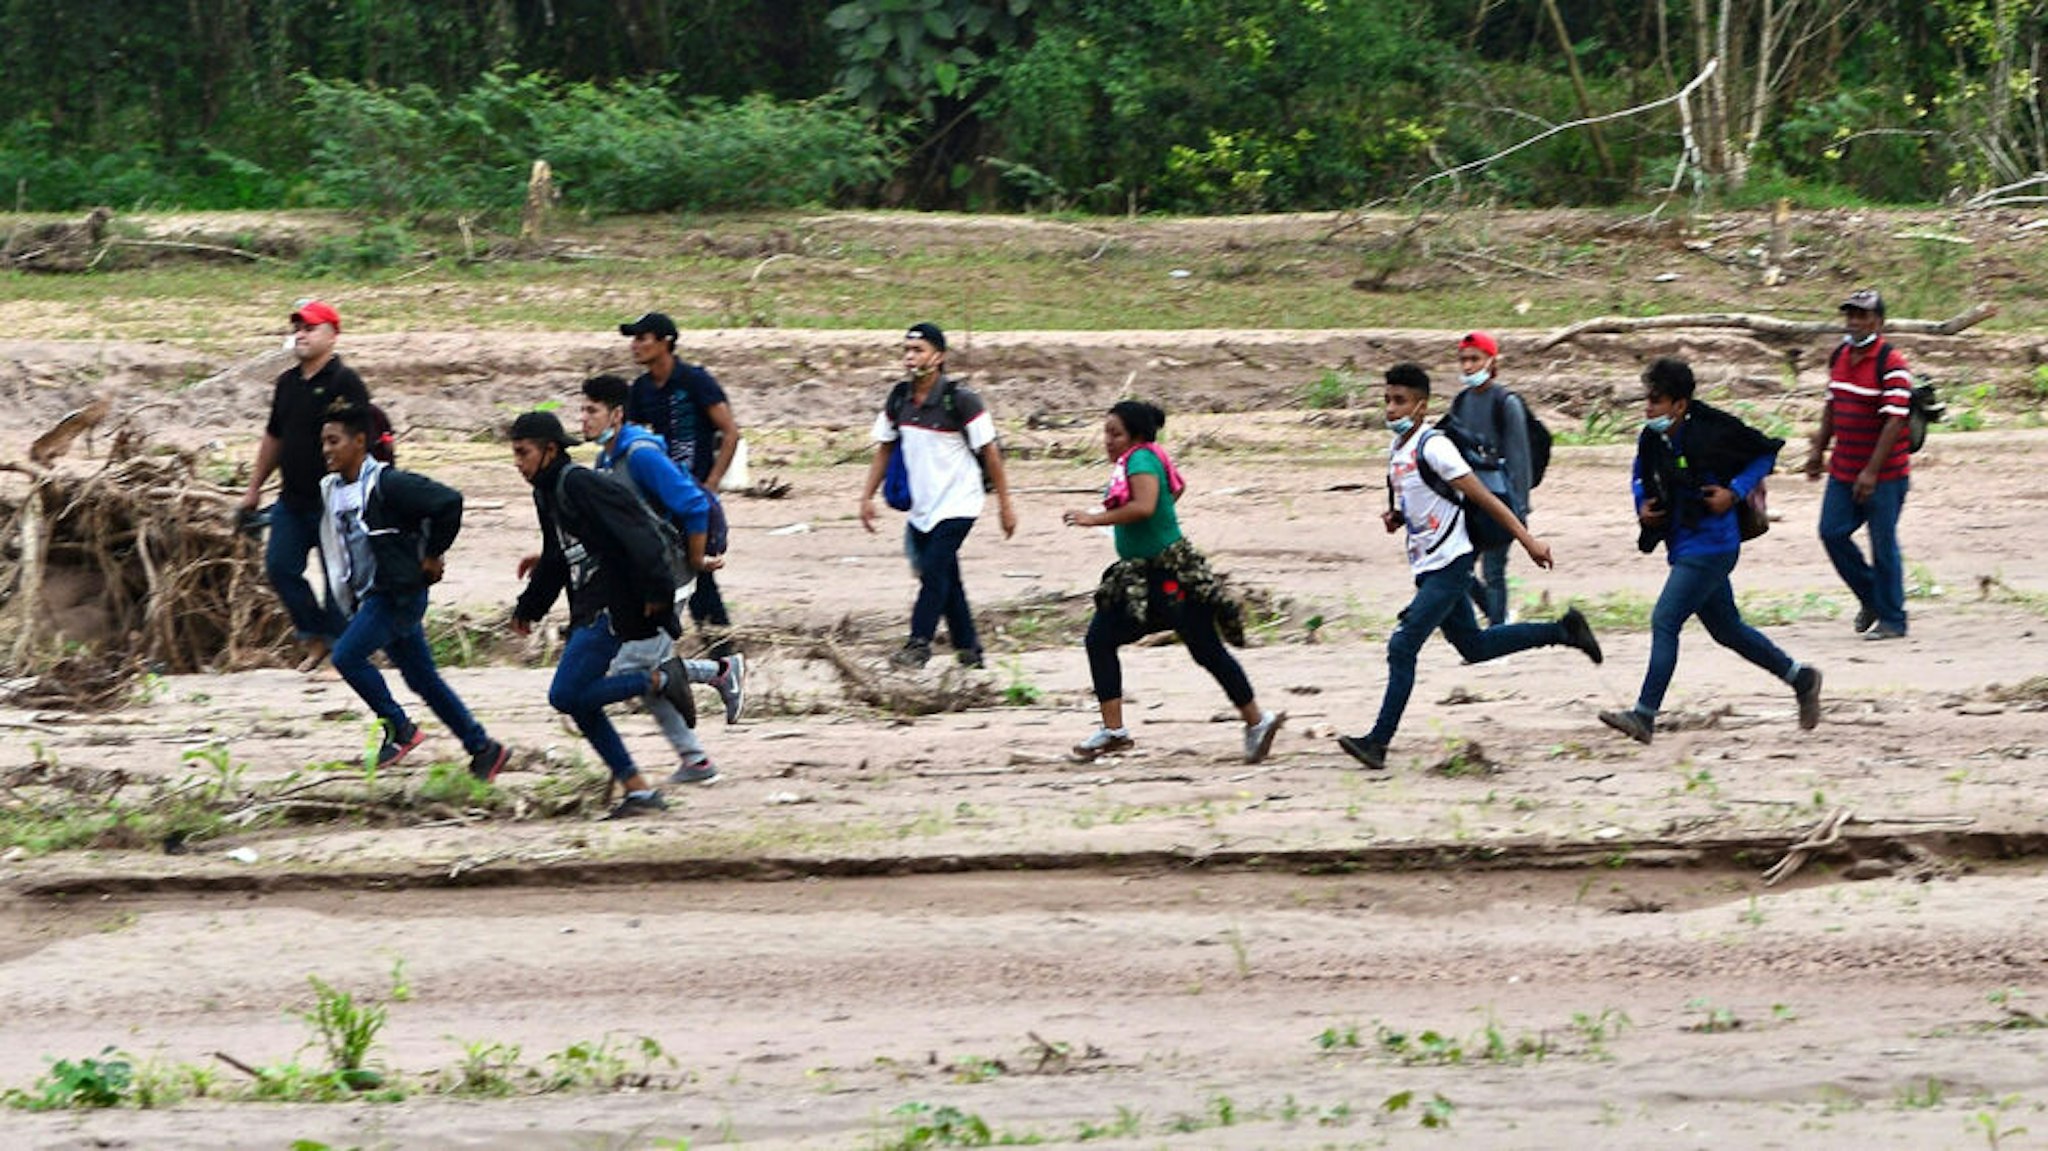 Migrants heading to the border with Guatemala on their way to the United States, cross the dried riverbed of the Copan River in the municipality of Santa Rita, in the Honduran department of Copan, on January 15, 2021. - Hundreds of asylum seekers are forming new migrant caravans in Honduras, planning to walk thousands of kilometers through Central America to the United States via Guatemala and Mexico, in search of a better life under the new administration of President-elect Joe Biden.